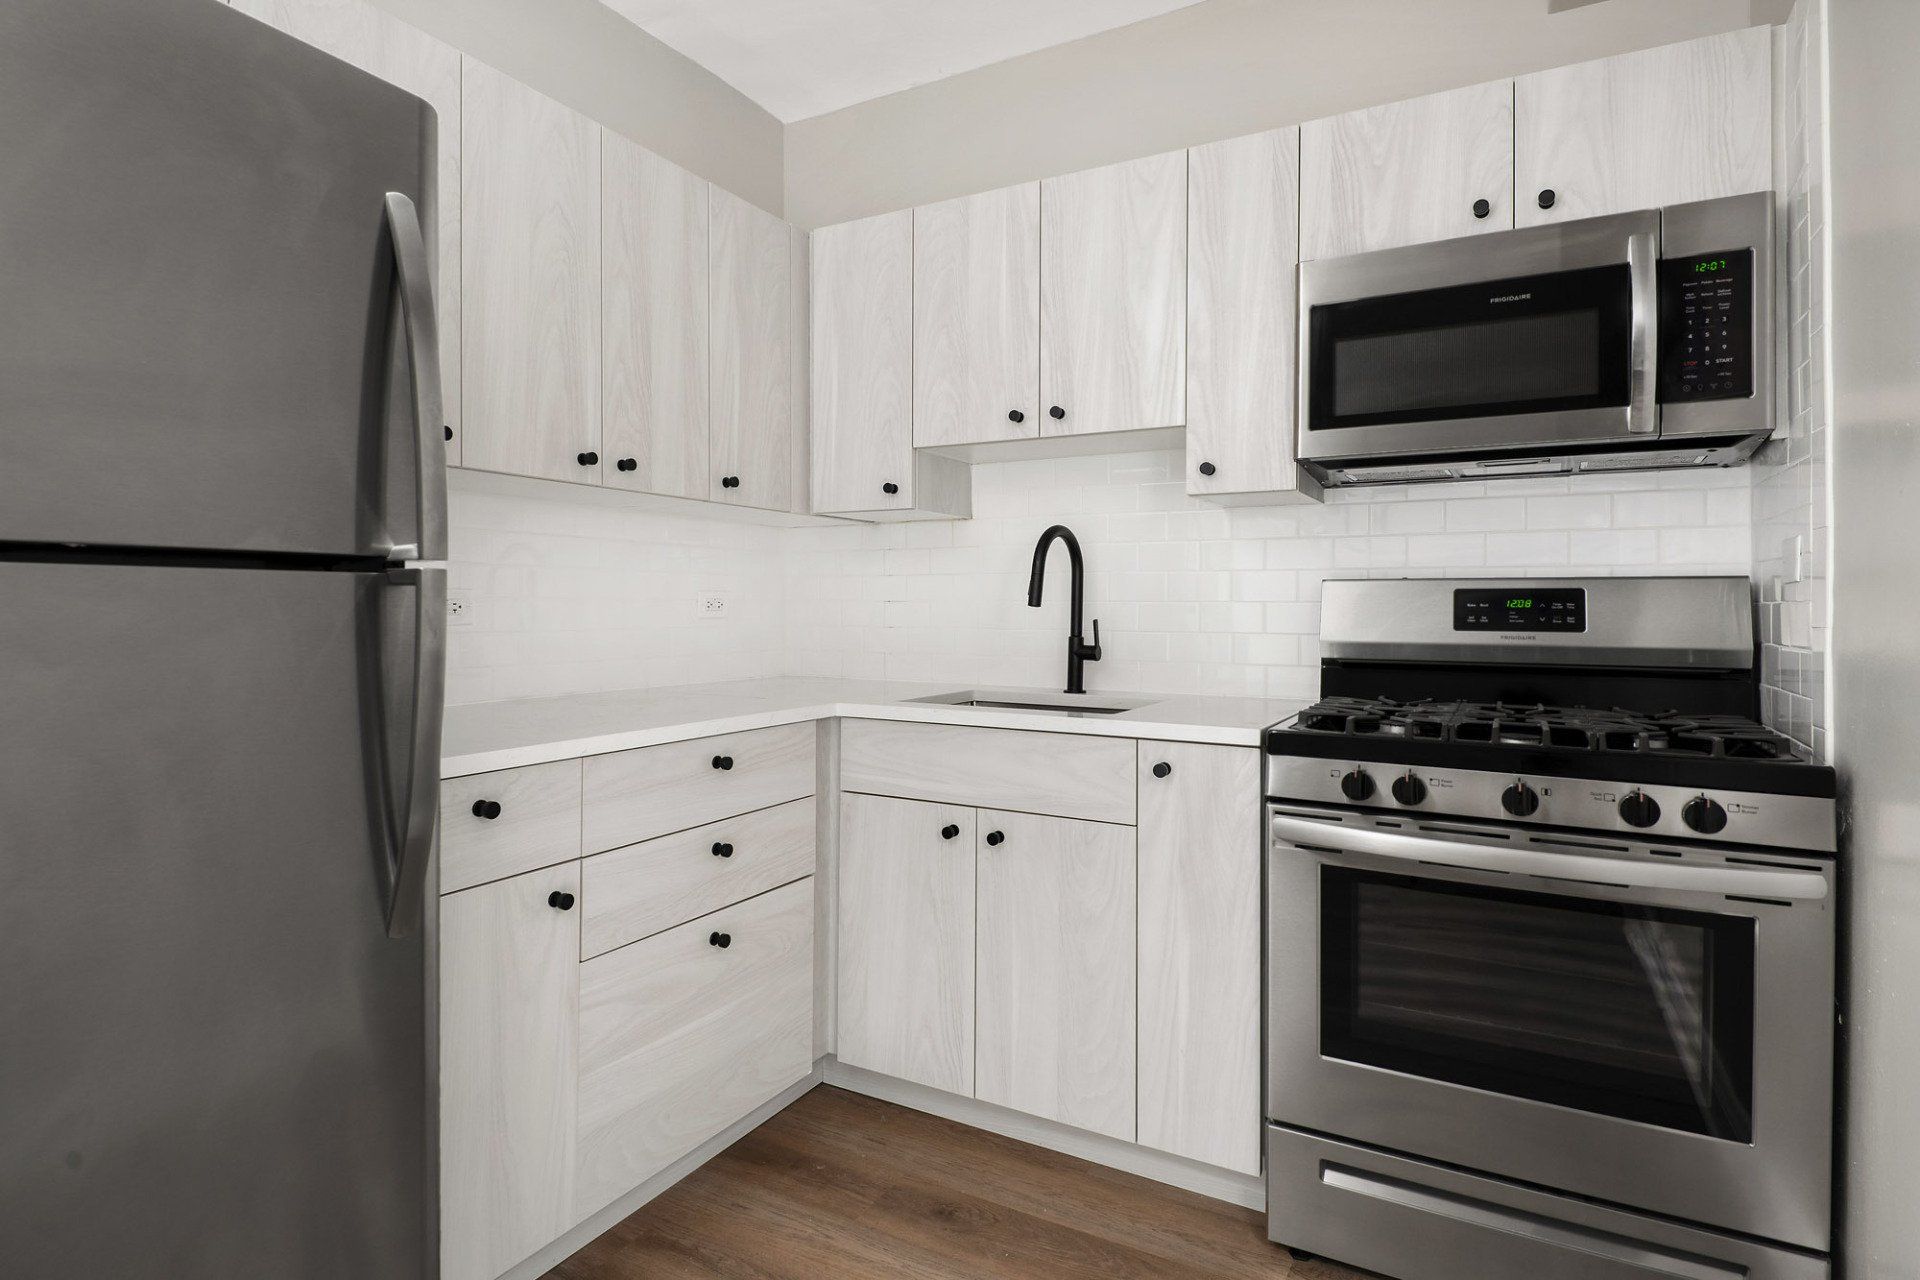 A kitchen with stainless steel appliances and white cabinets at Reside on Clarendon.